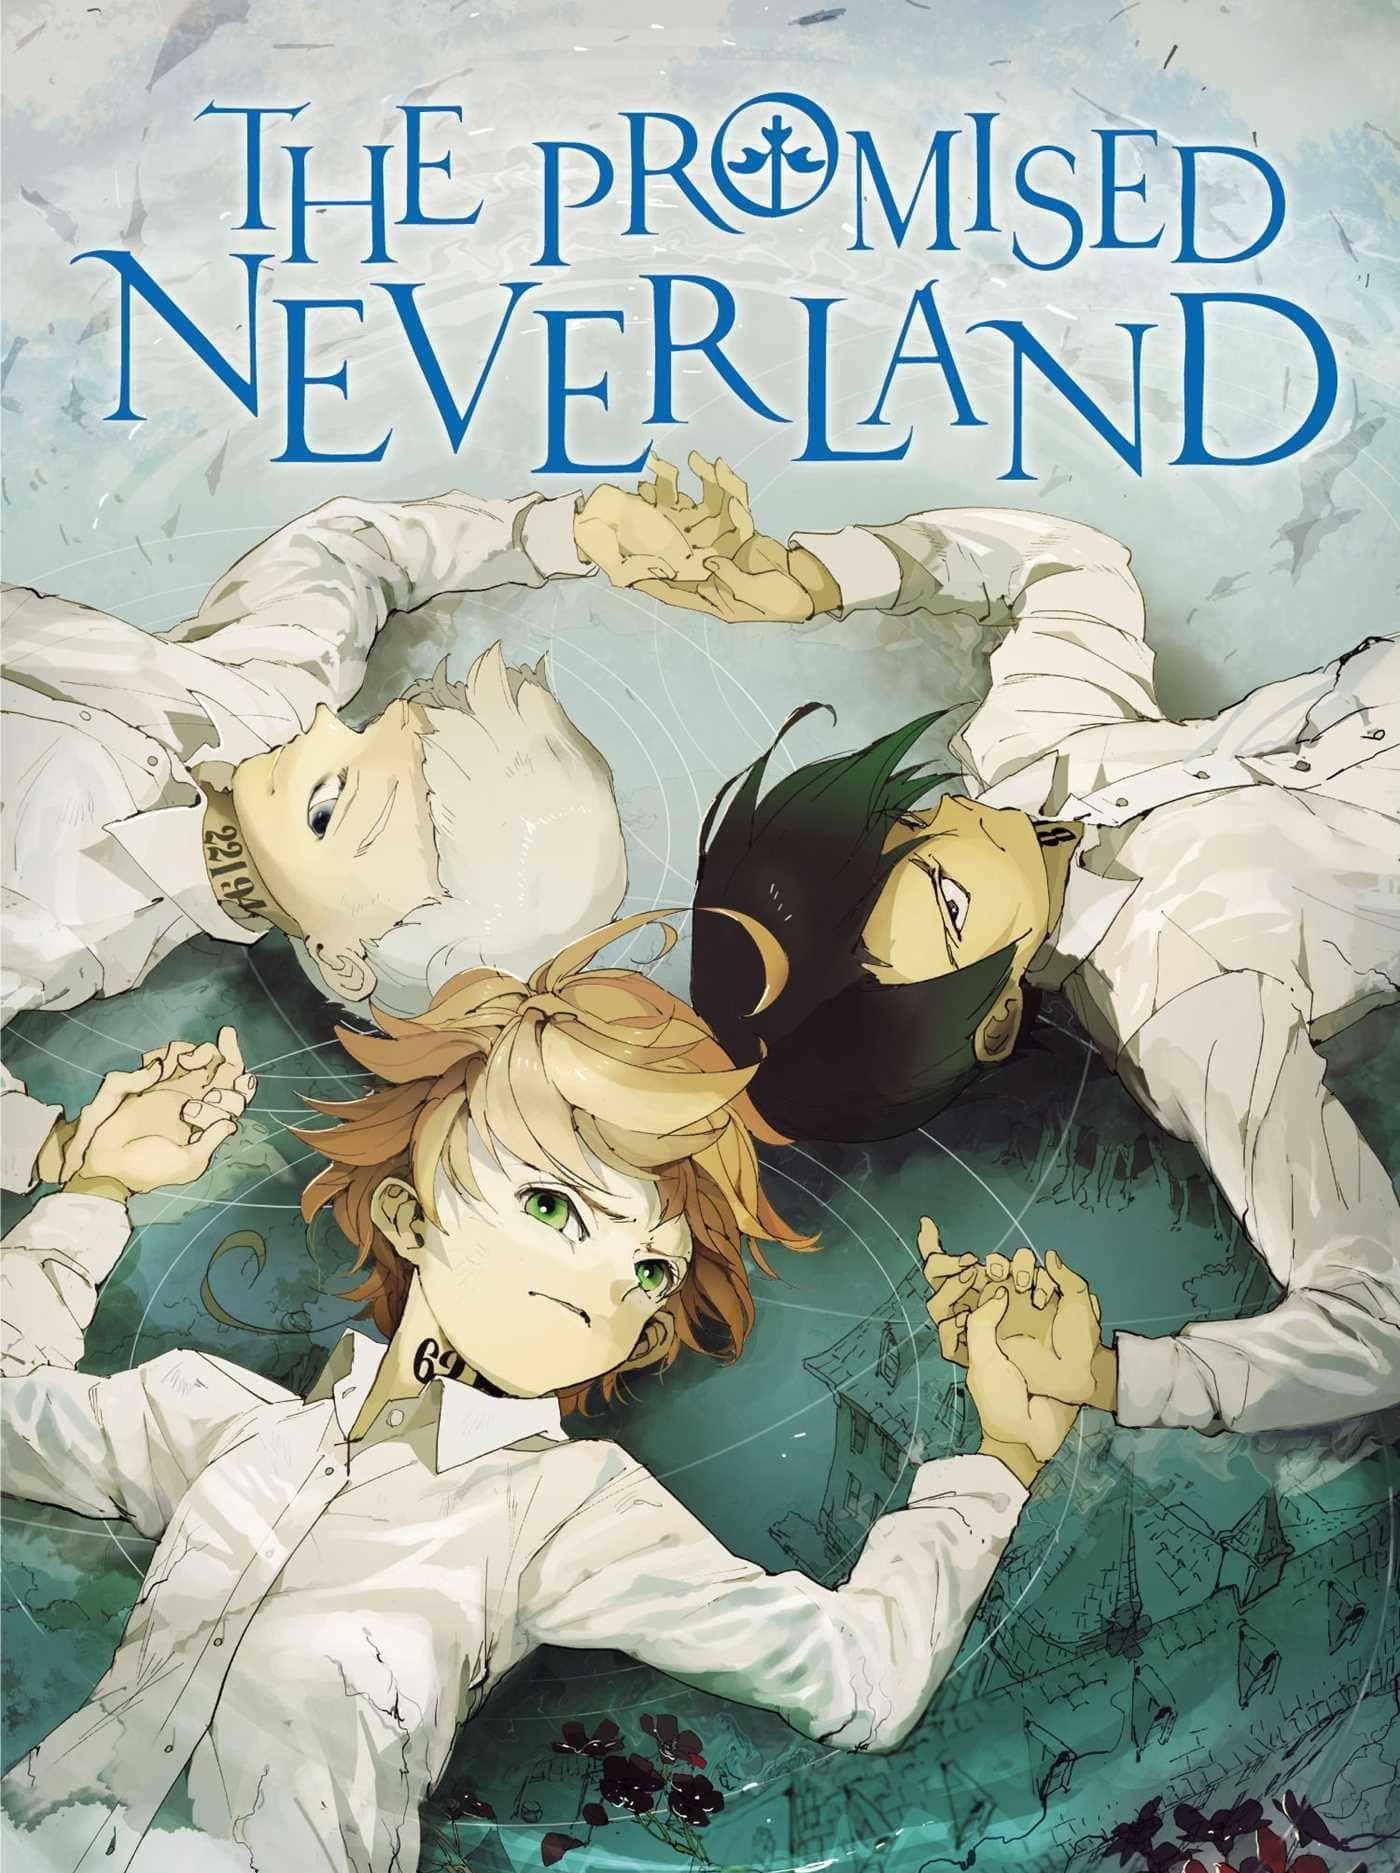 The Promised Neverland's Norman striking a confident pose Wallpaper